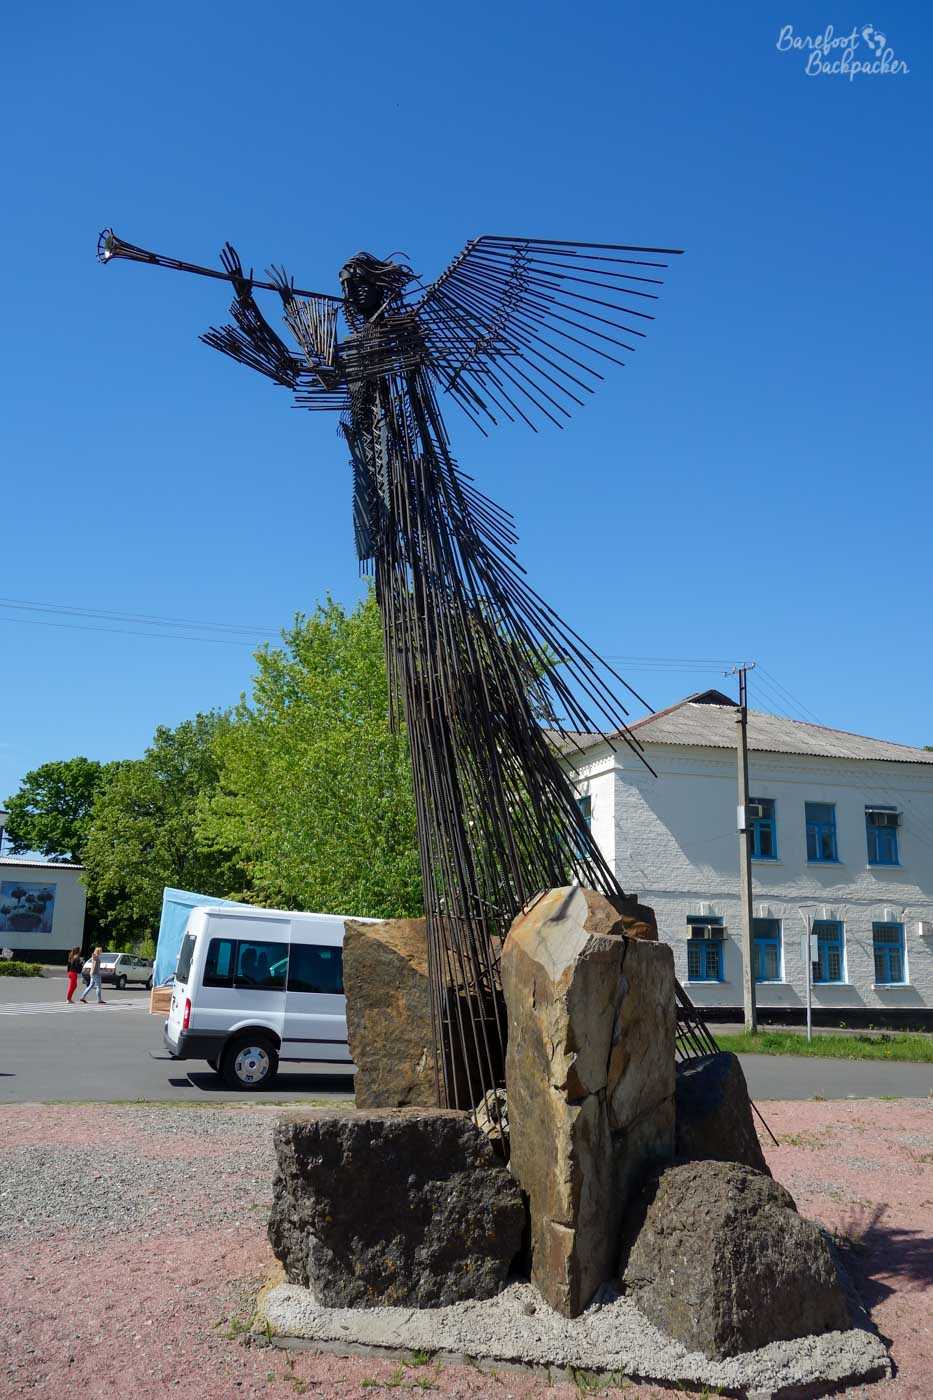 Standing in a pile of boulders is a statue made up of little pipes of wire. It's a tall statue – several metres in height, and it's of a figure with a long cape and wings, blowing a long straight horn-type instrument. It is dark against the bright blue sky and green trees behind it.